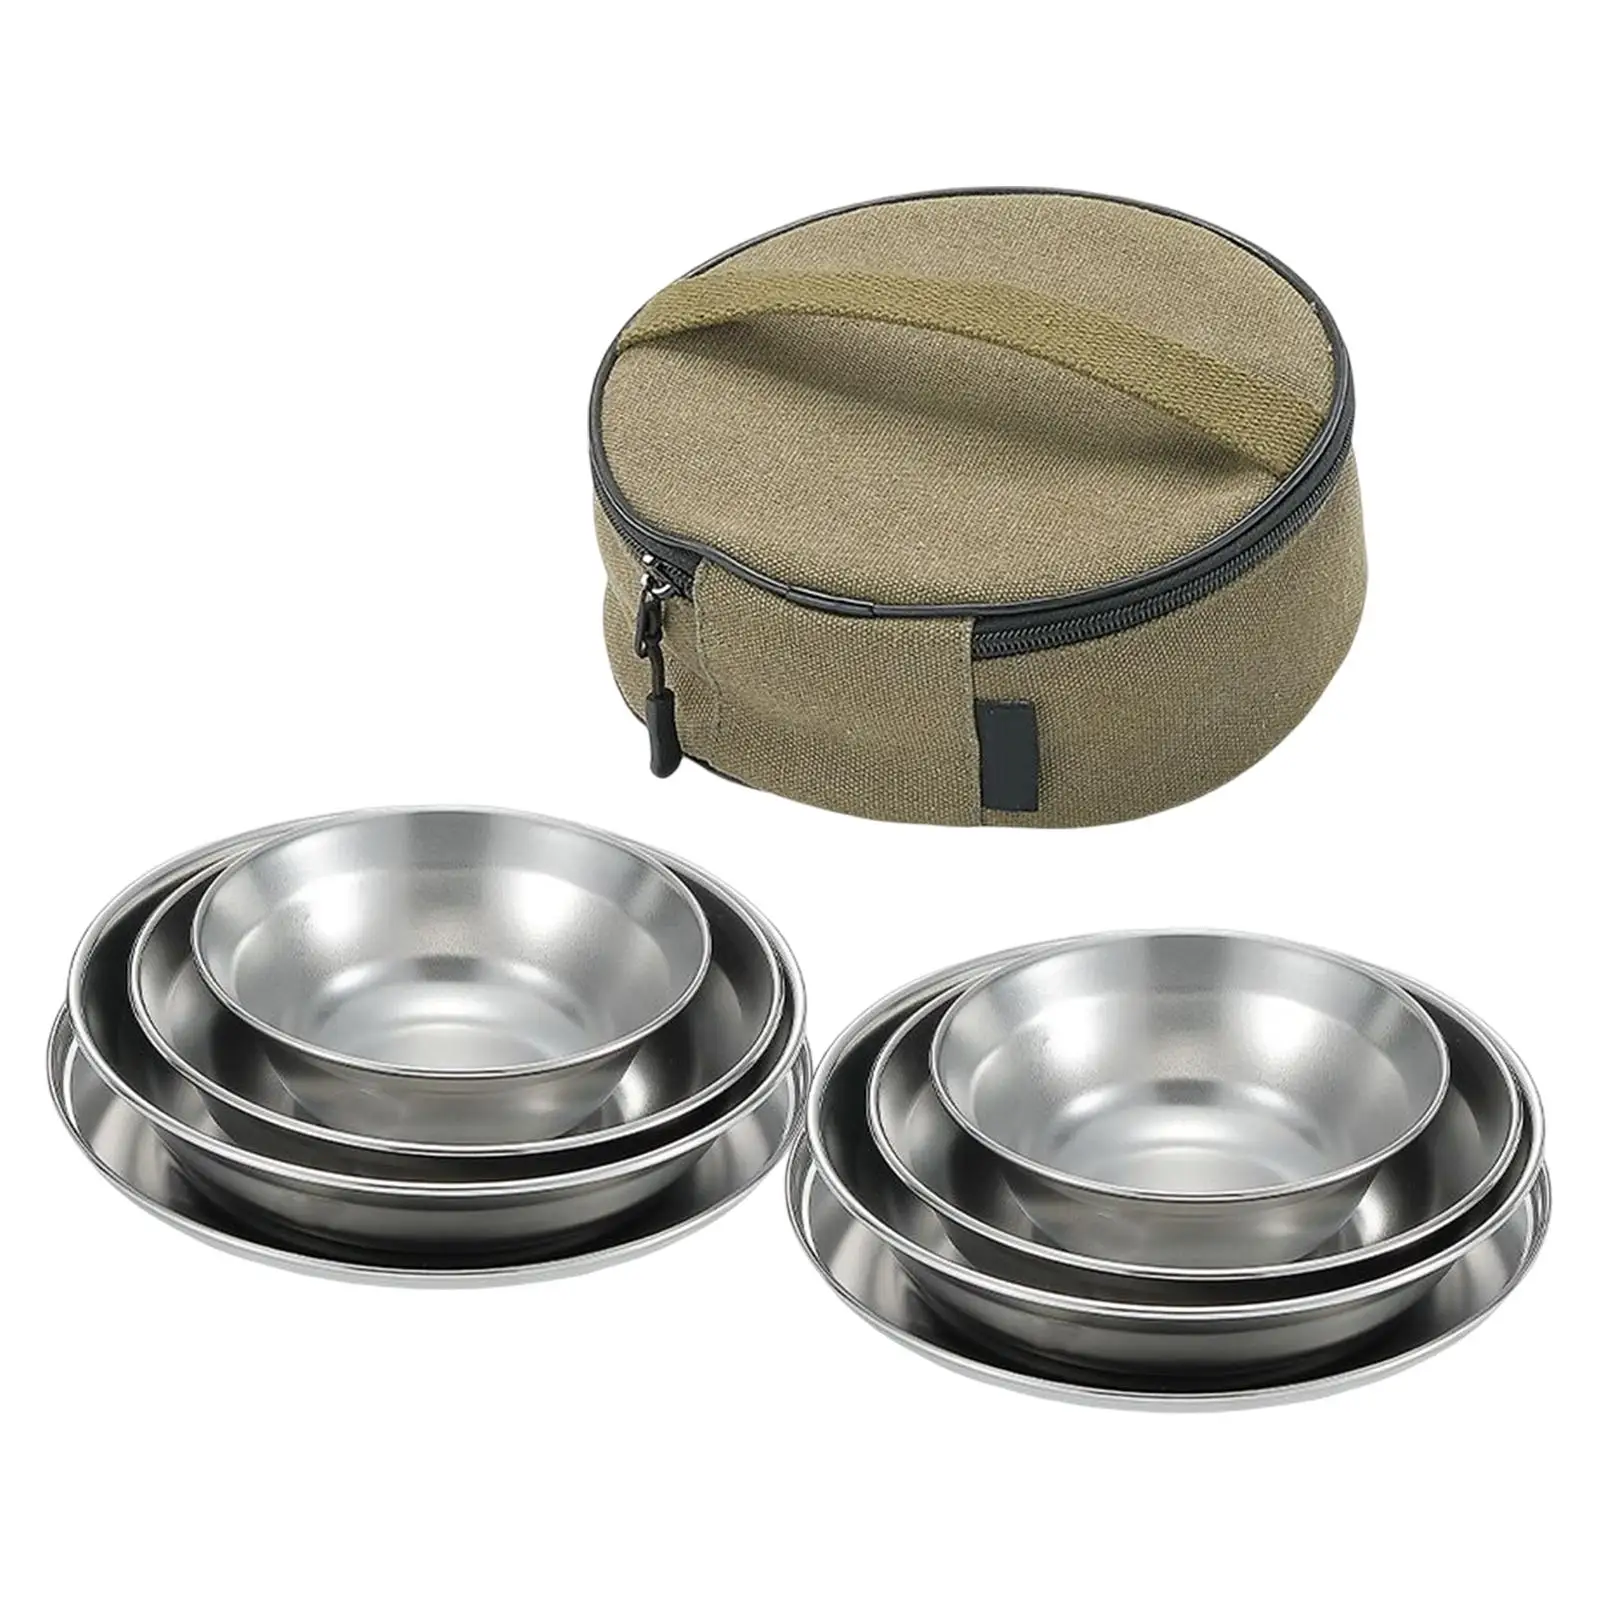 Portable Camping Tableware Set with Storage Bag Dinner Dish Cookware Dinnerware Soup Bowl Tray Kitchen Utensils for BBQ Picnic